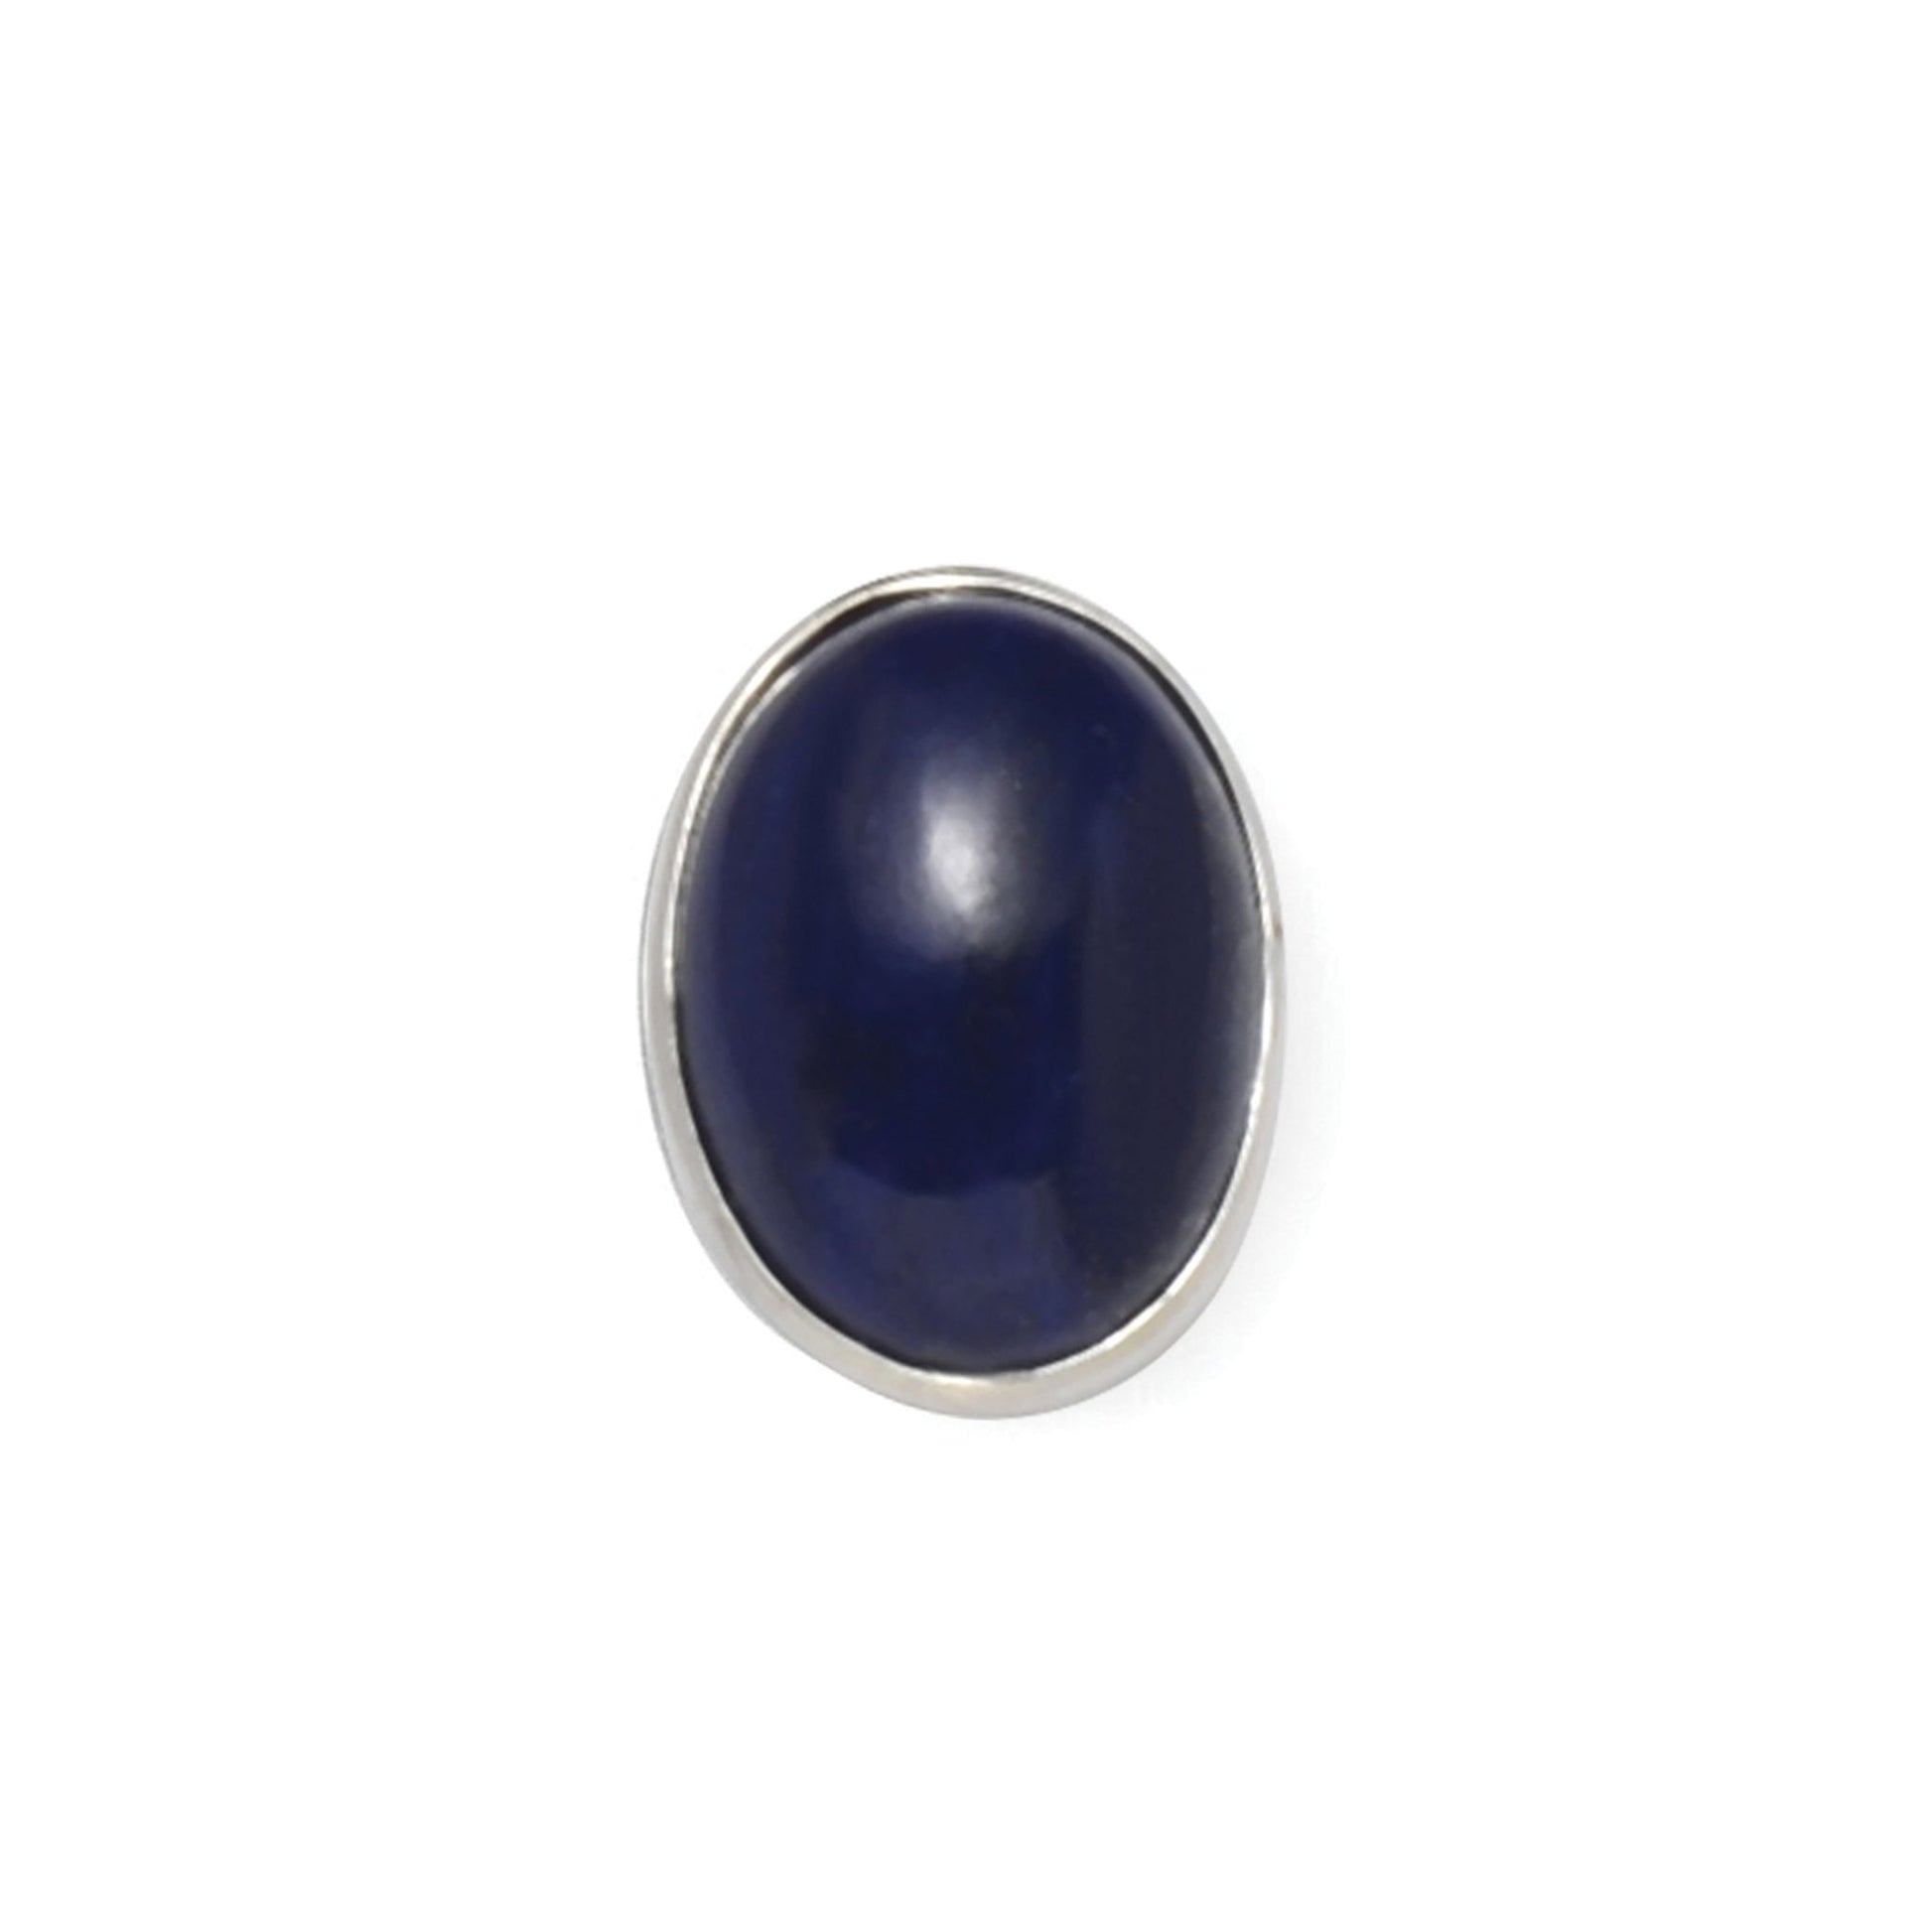 A lapis lazuli cabochon sterling silver tie tack displayed on a neutral white background.